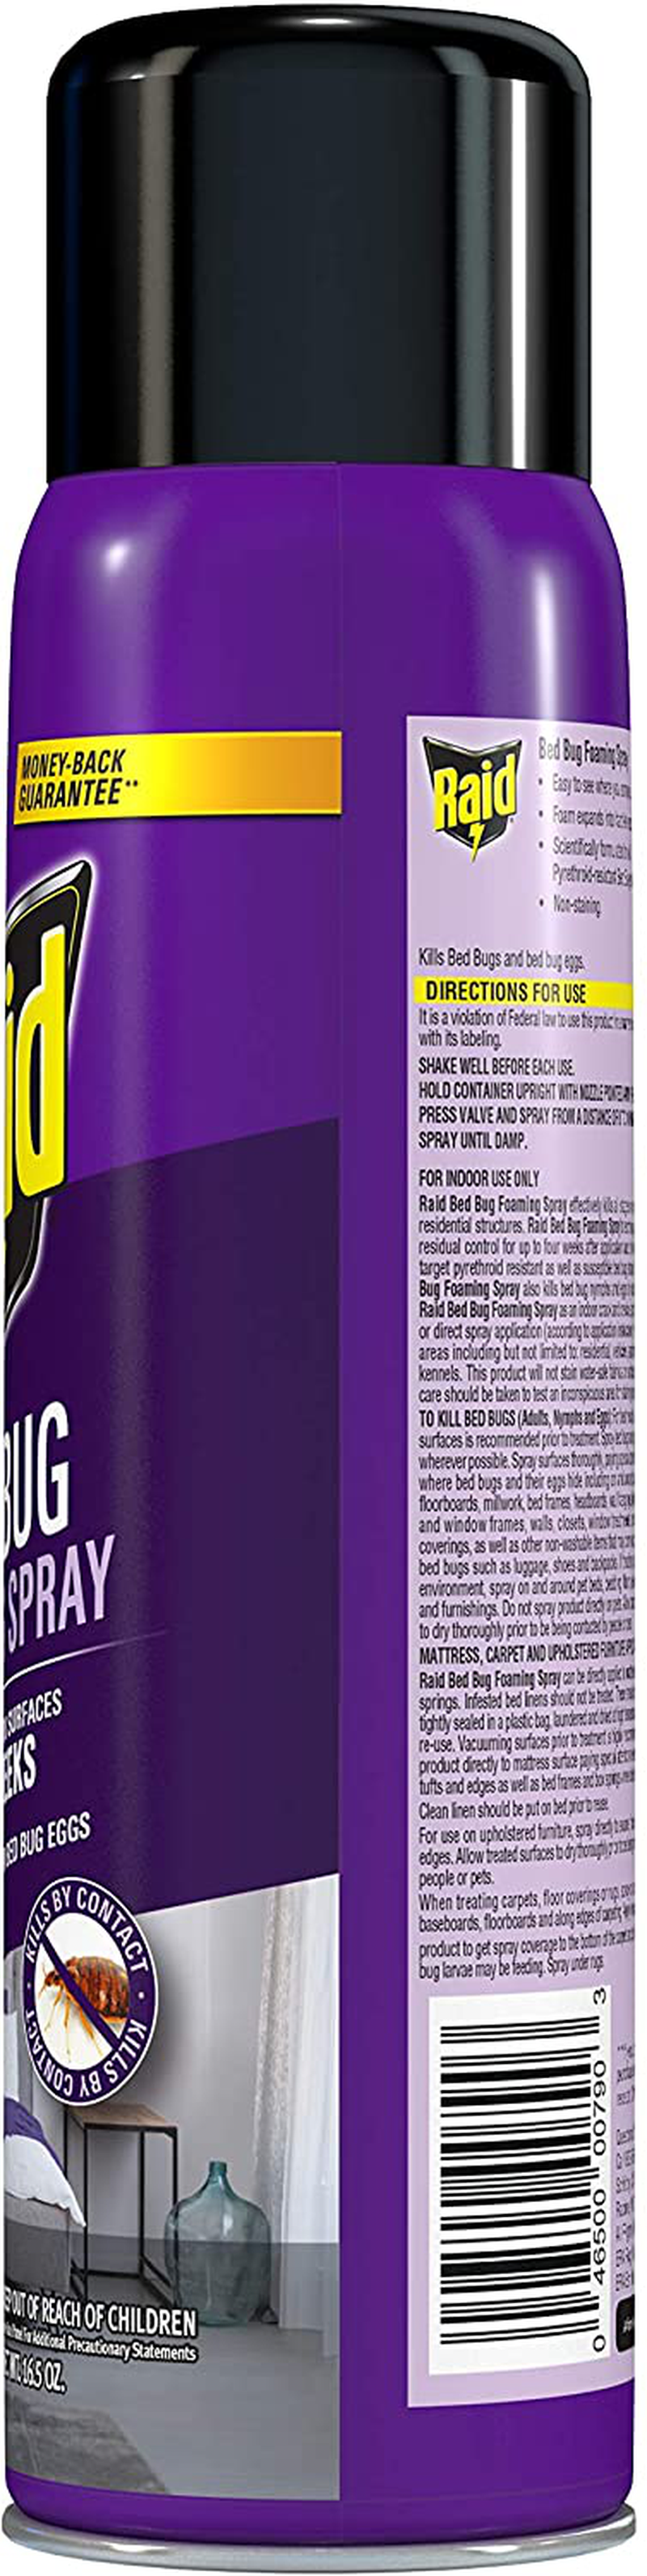 Raid Bed Bug Foaming Spray, For Indoor Use, Non-Staining, 16.5 Oz, Pack of 1